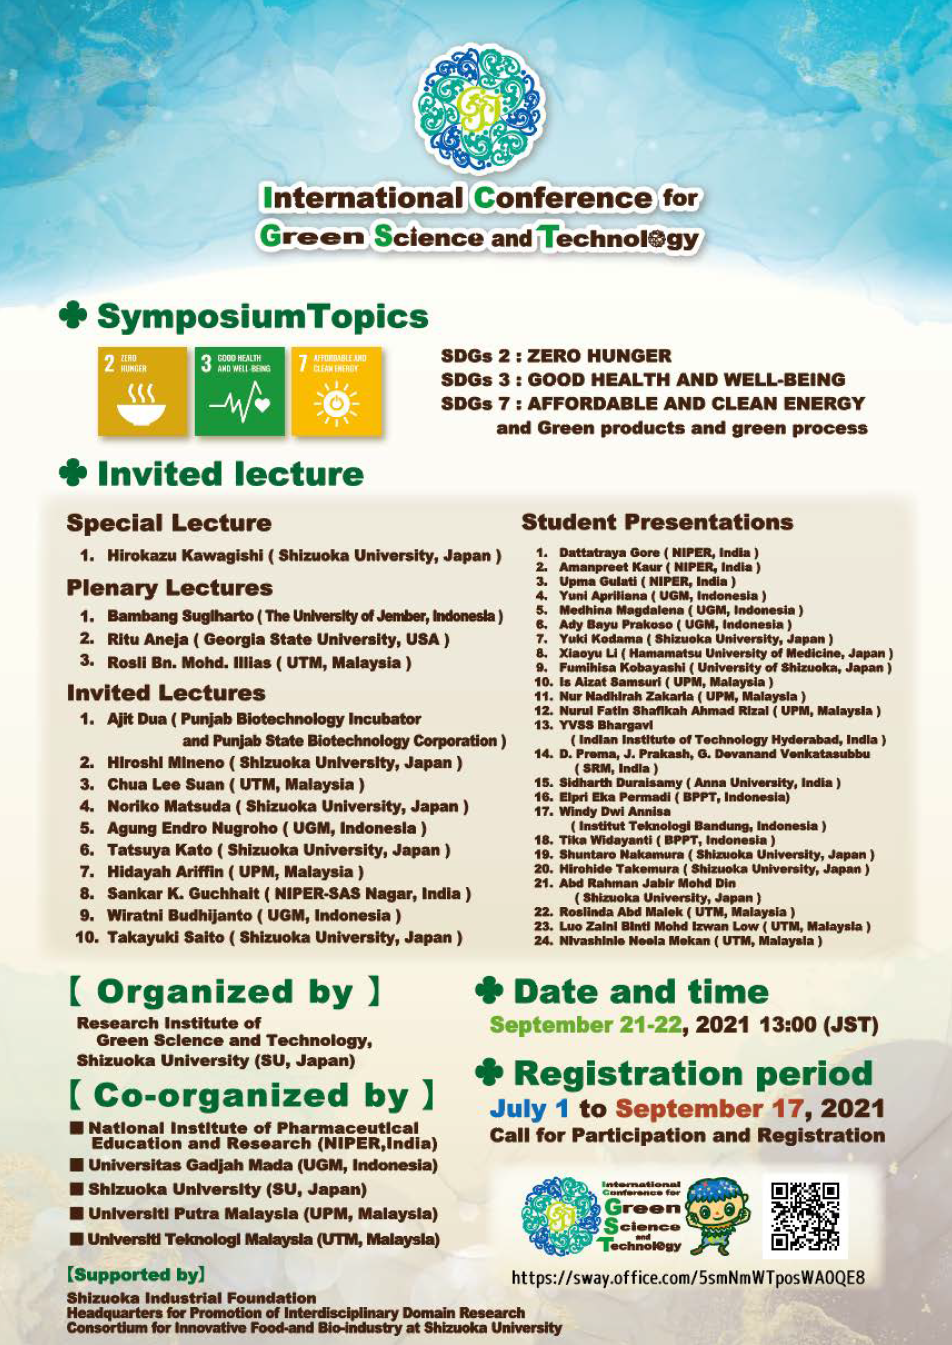 International Conference on Green Science and Technology 2021 (ICGST2021)